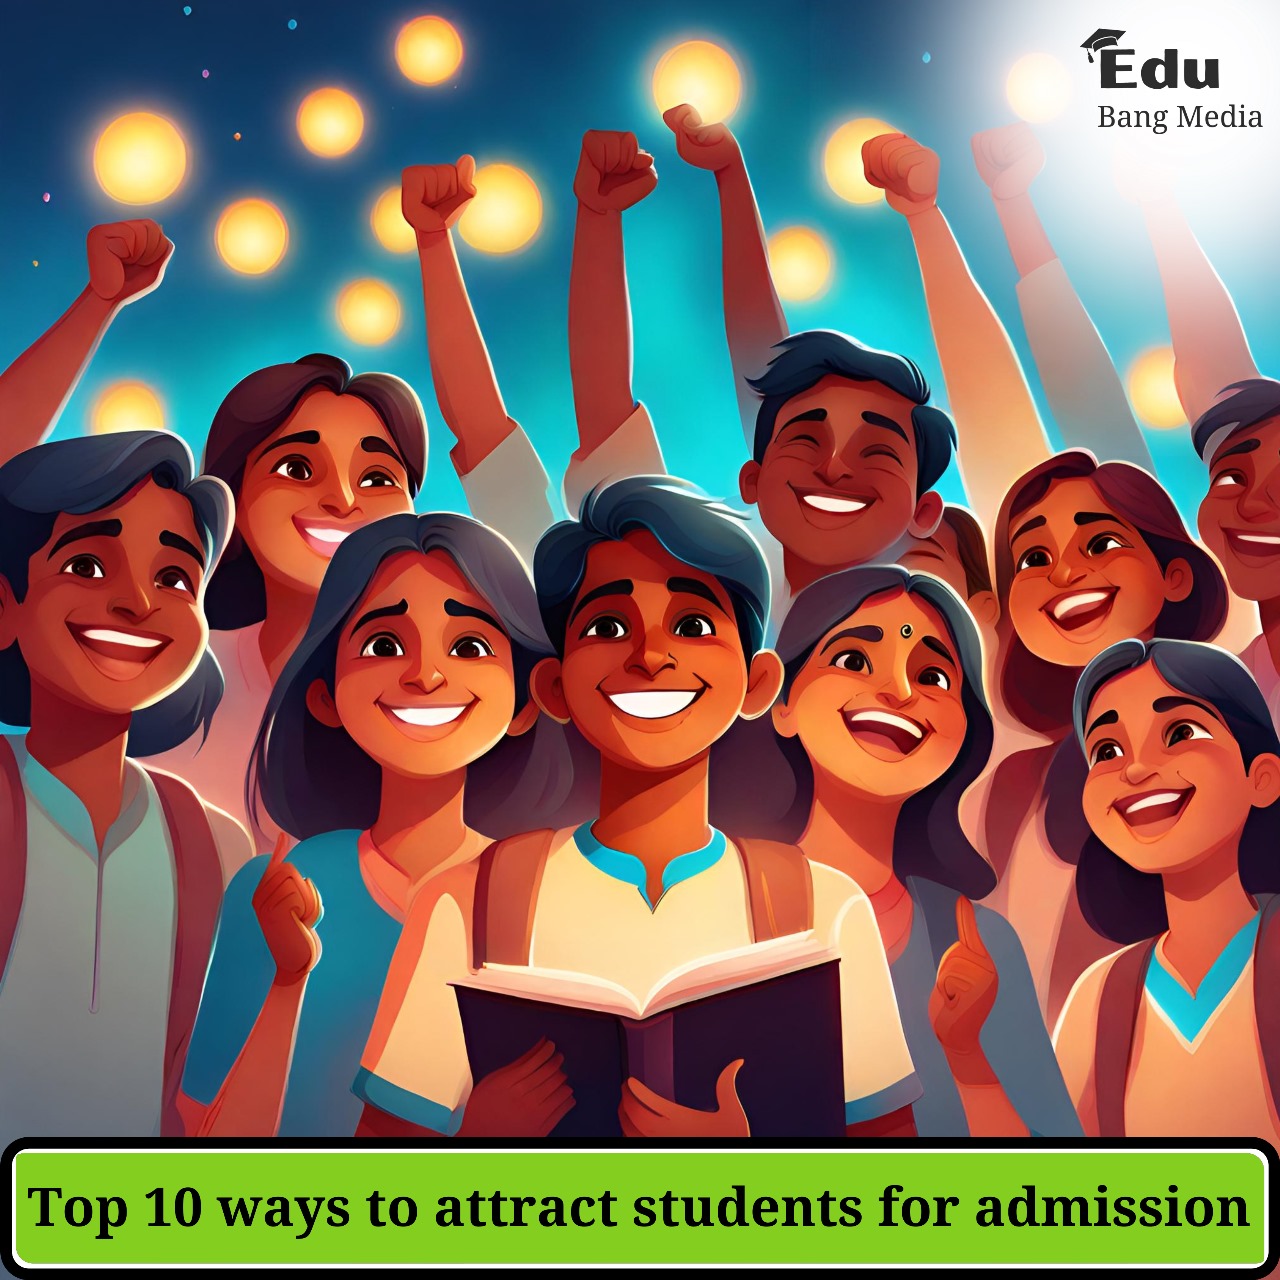 Top 10 ways to attract students for admission - edubang